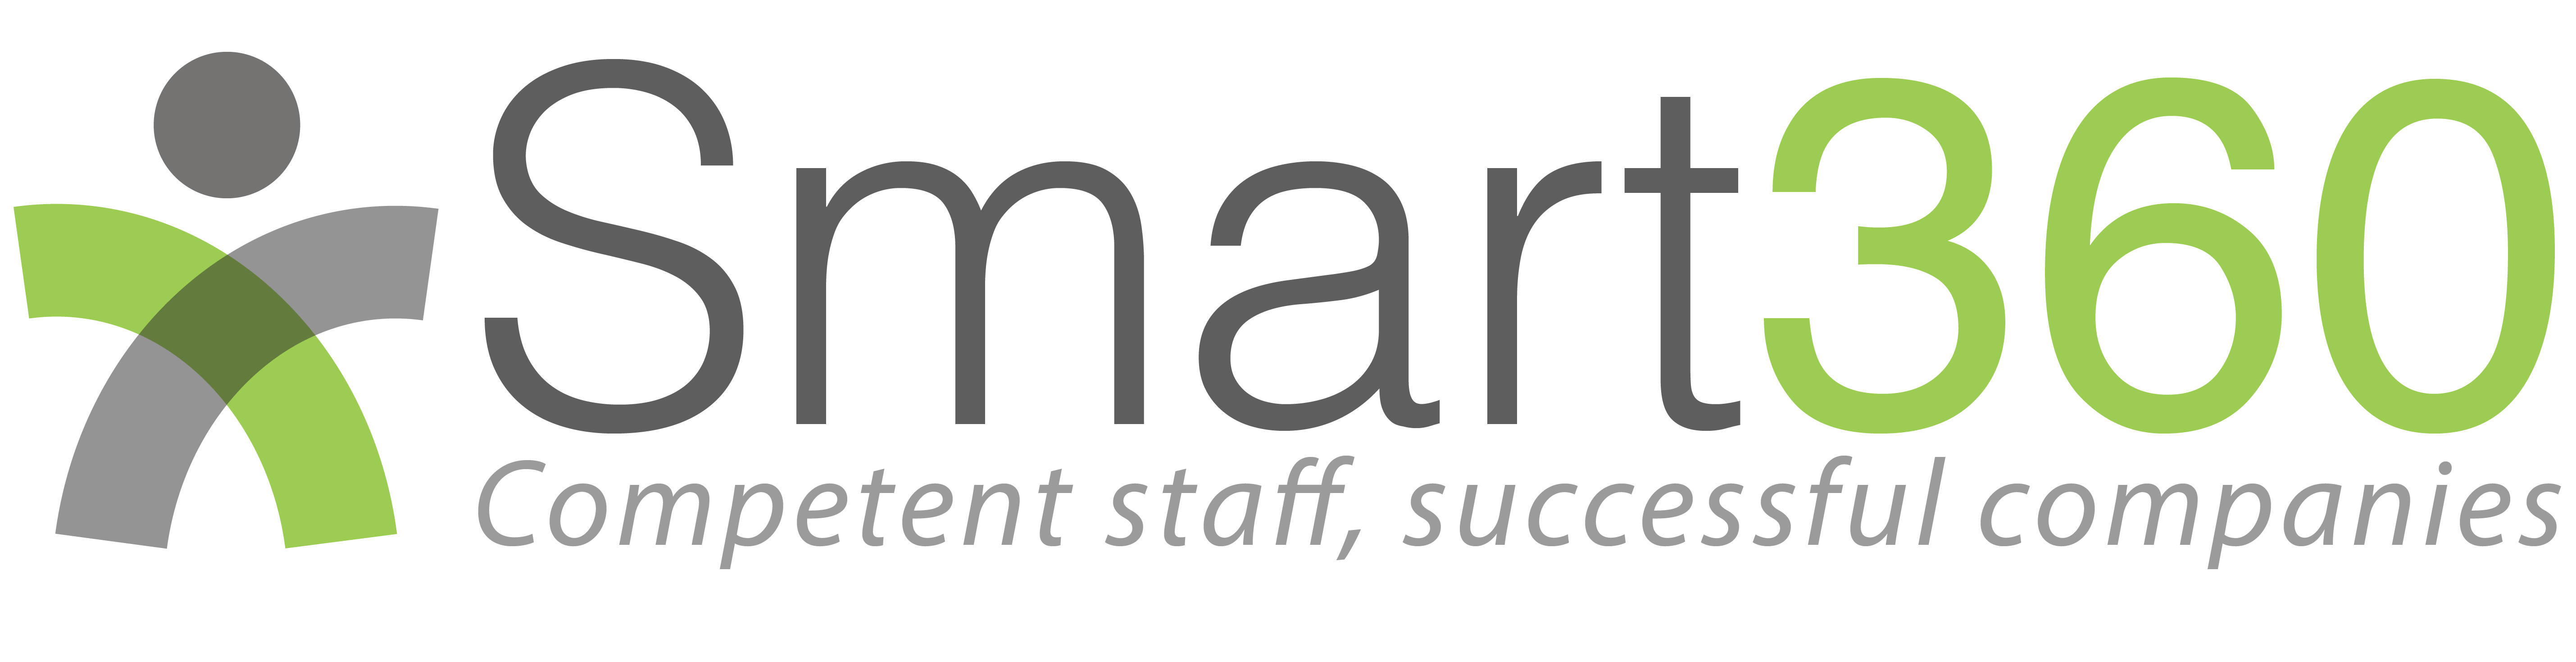 Smart 360 is the online 360-degree feedback tool to apply performance evaluations and obtain more significant results while increasing your employee's productivity within the company